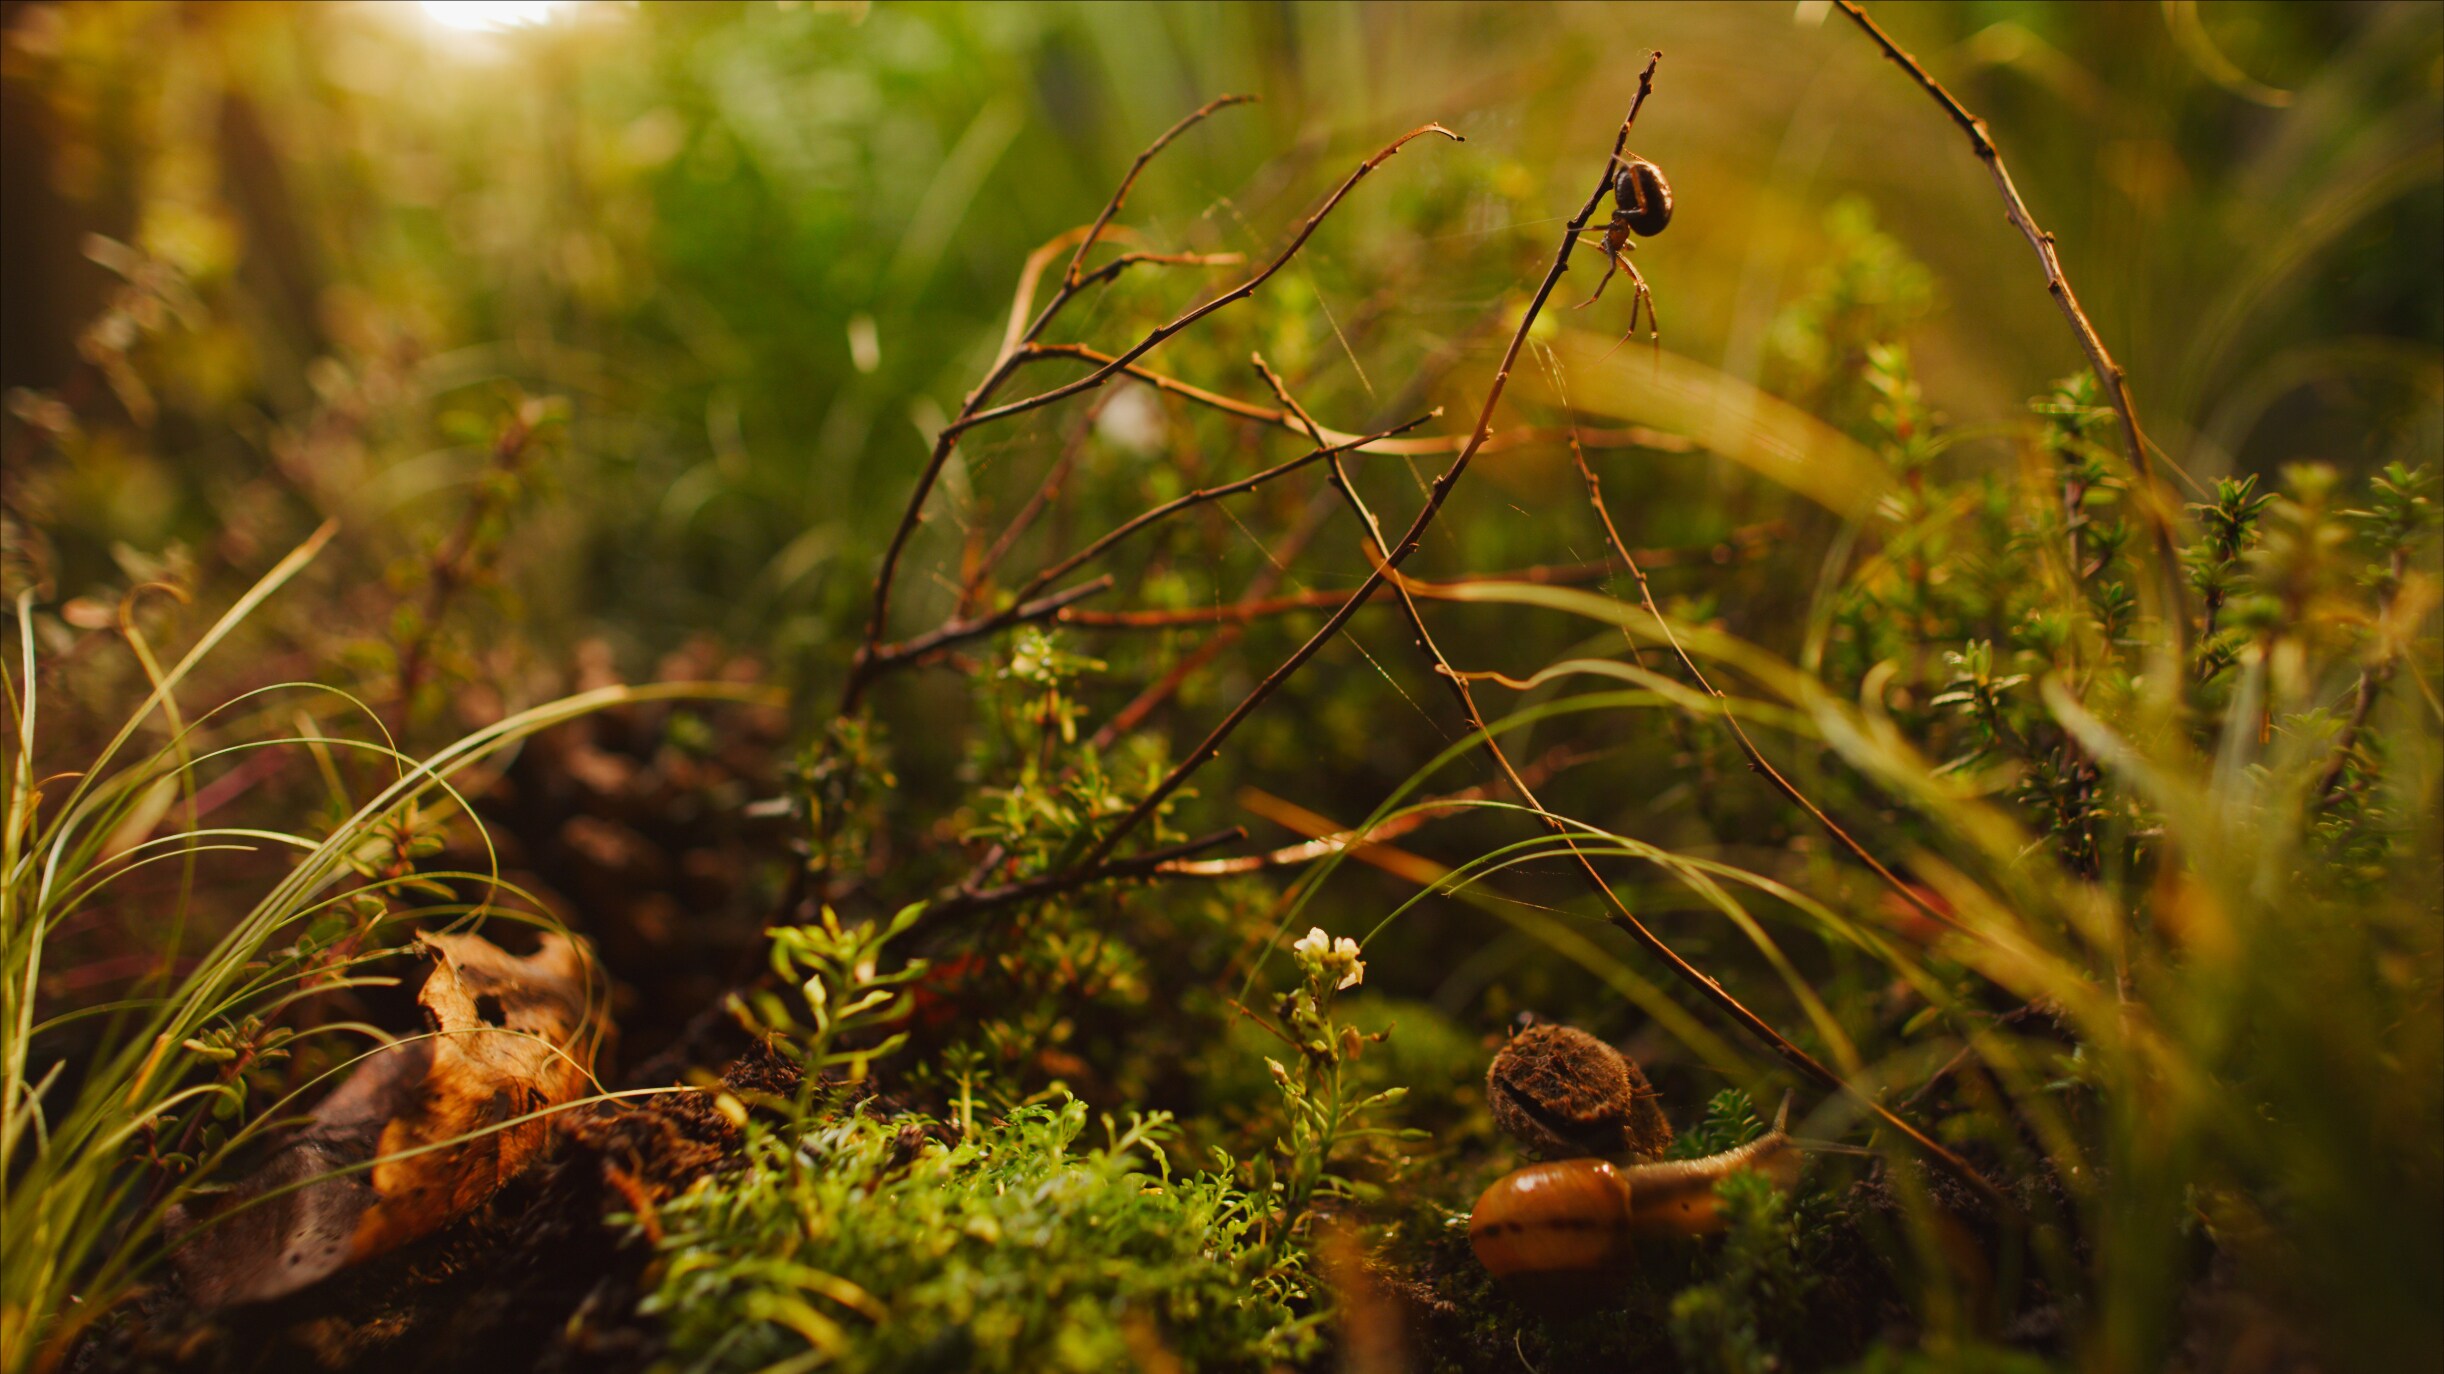 Cupboard spider on a twig on forest floor, snail in the foreground. (National Geographic for Disney+/George Woodcock)